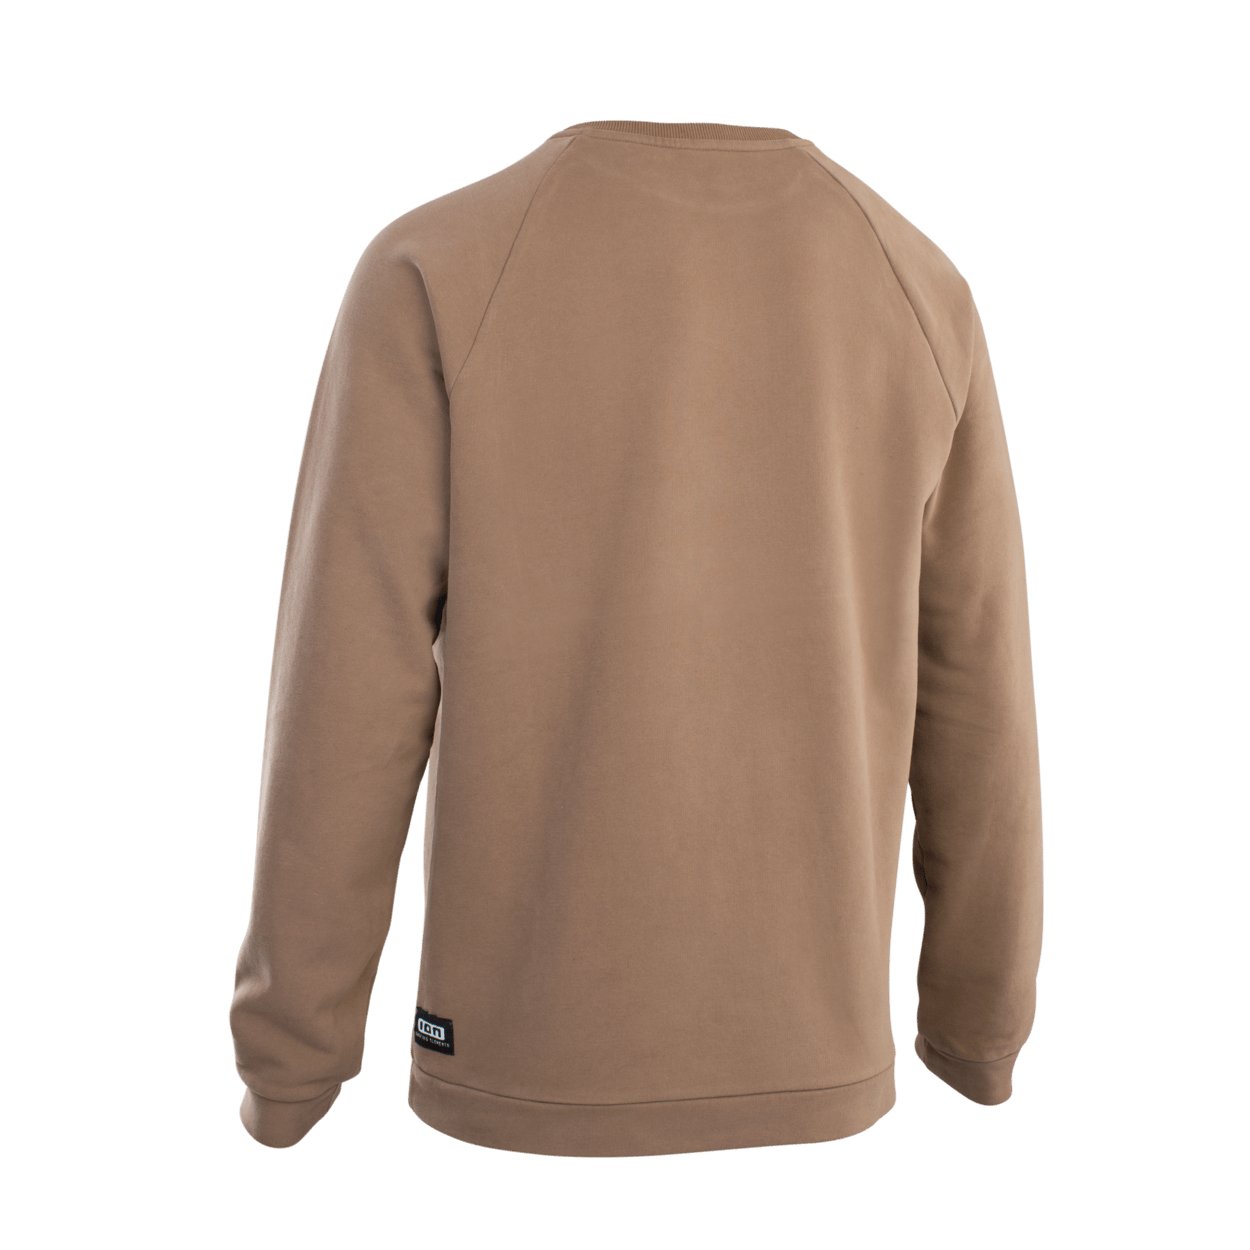 ION Men Sweater Surfing Elements 2023 - Worthing Watersports - 9010583032559 - Apparel - ION Bike